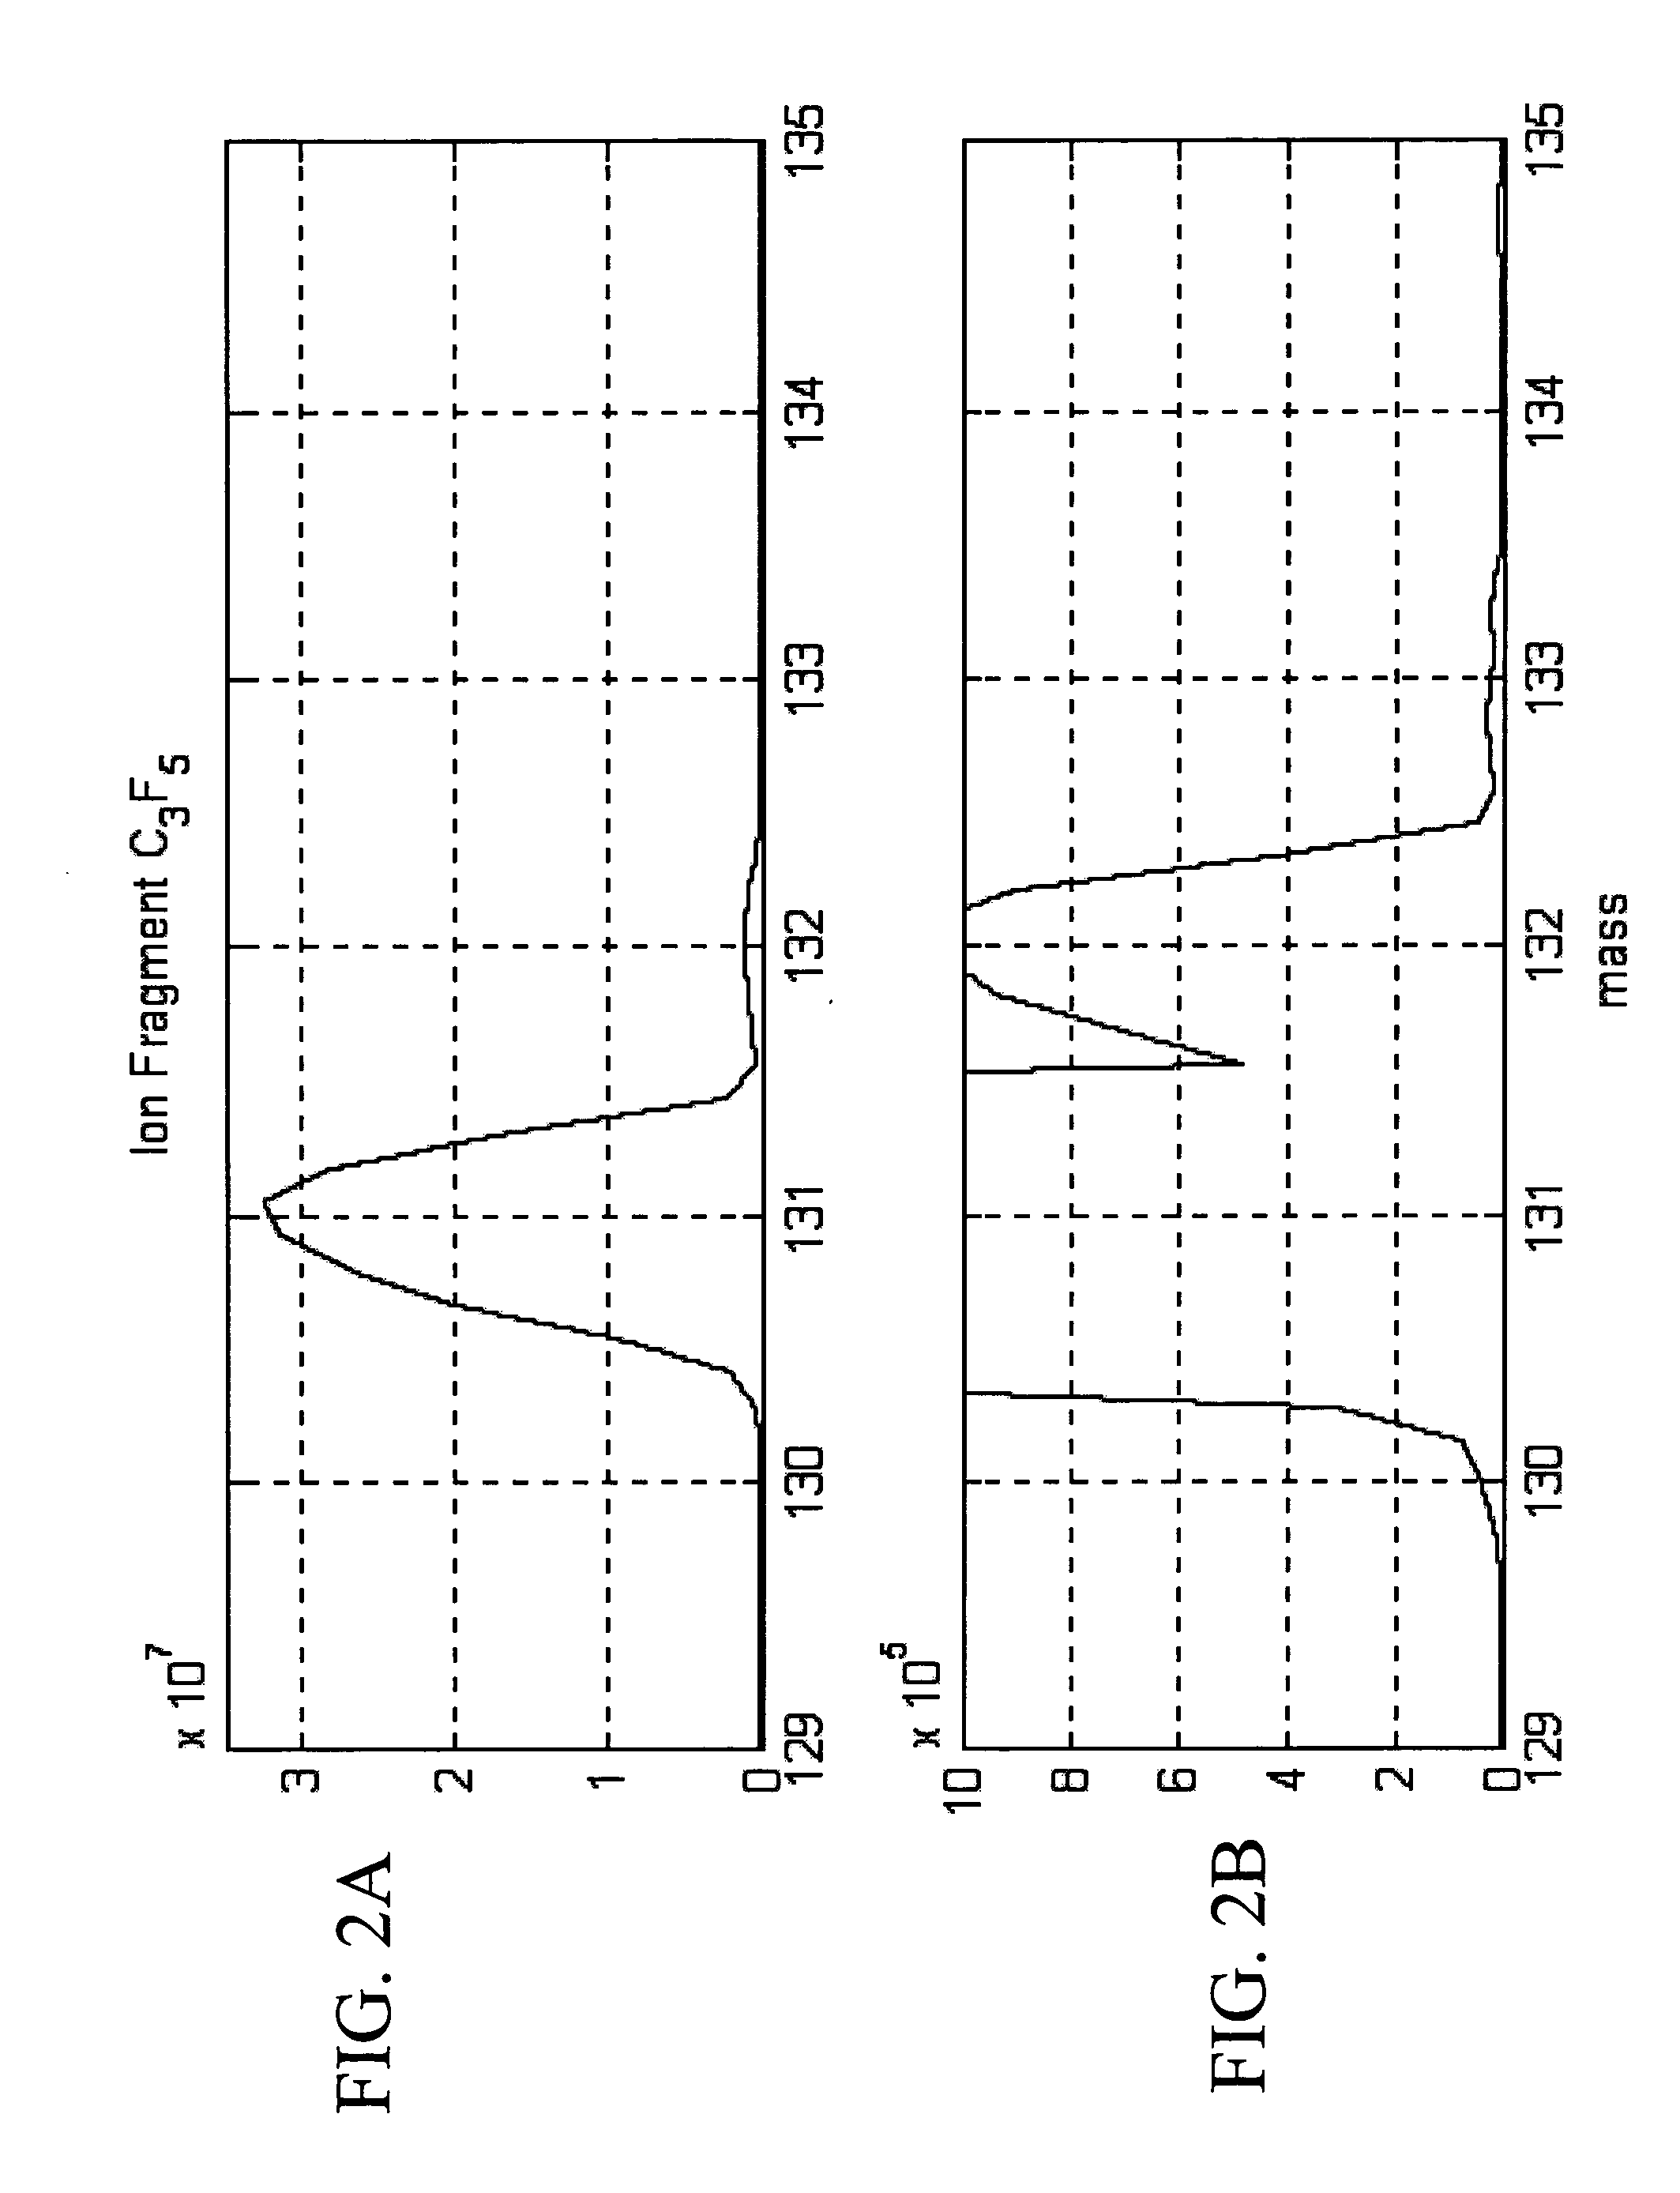 Methods for operating mass spectrometry (MS) instrument systems